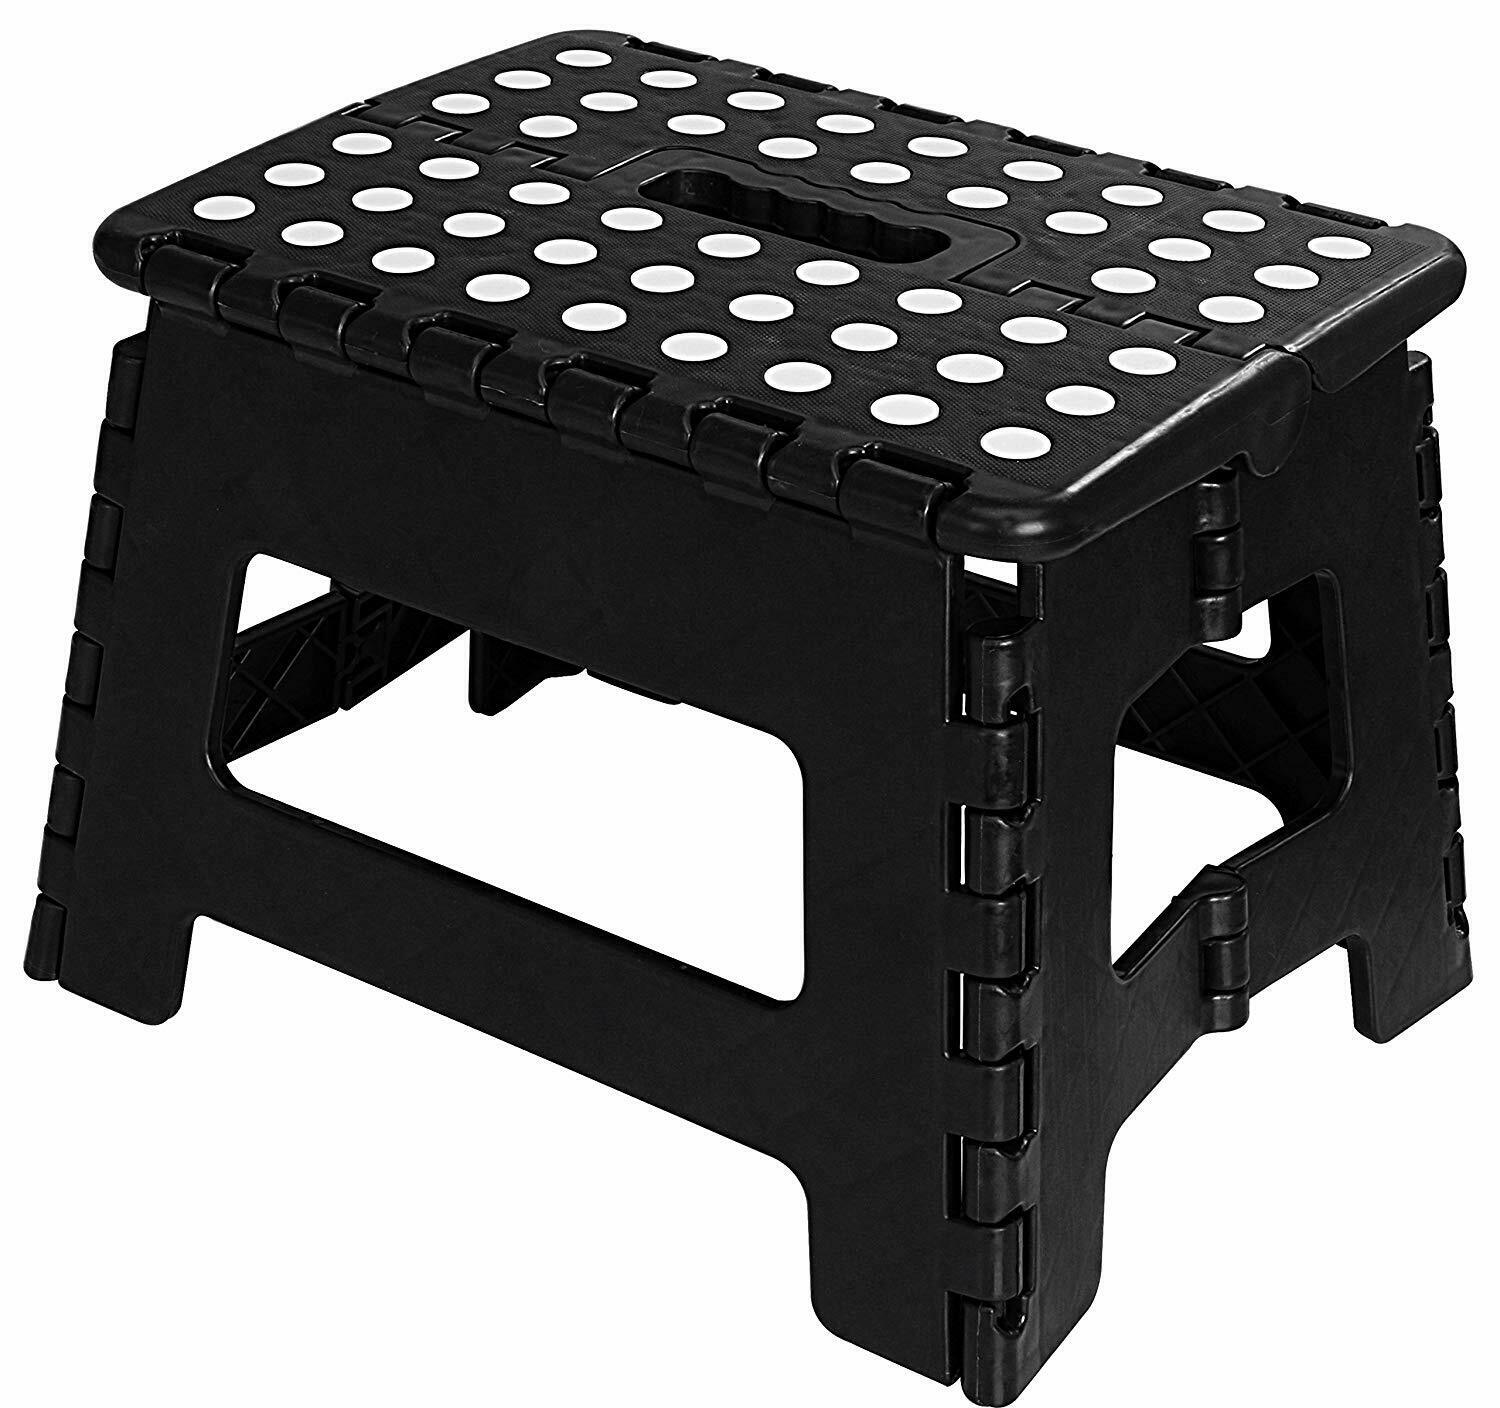 Folding Step Stool For Kids 11" Wide 9" Tall Plastic 300lbs Capacity Utopia Home